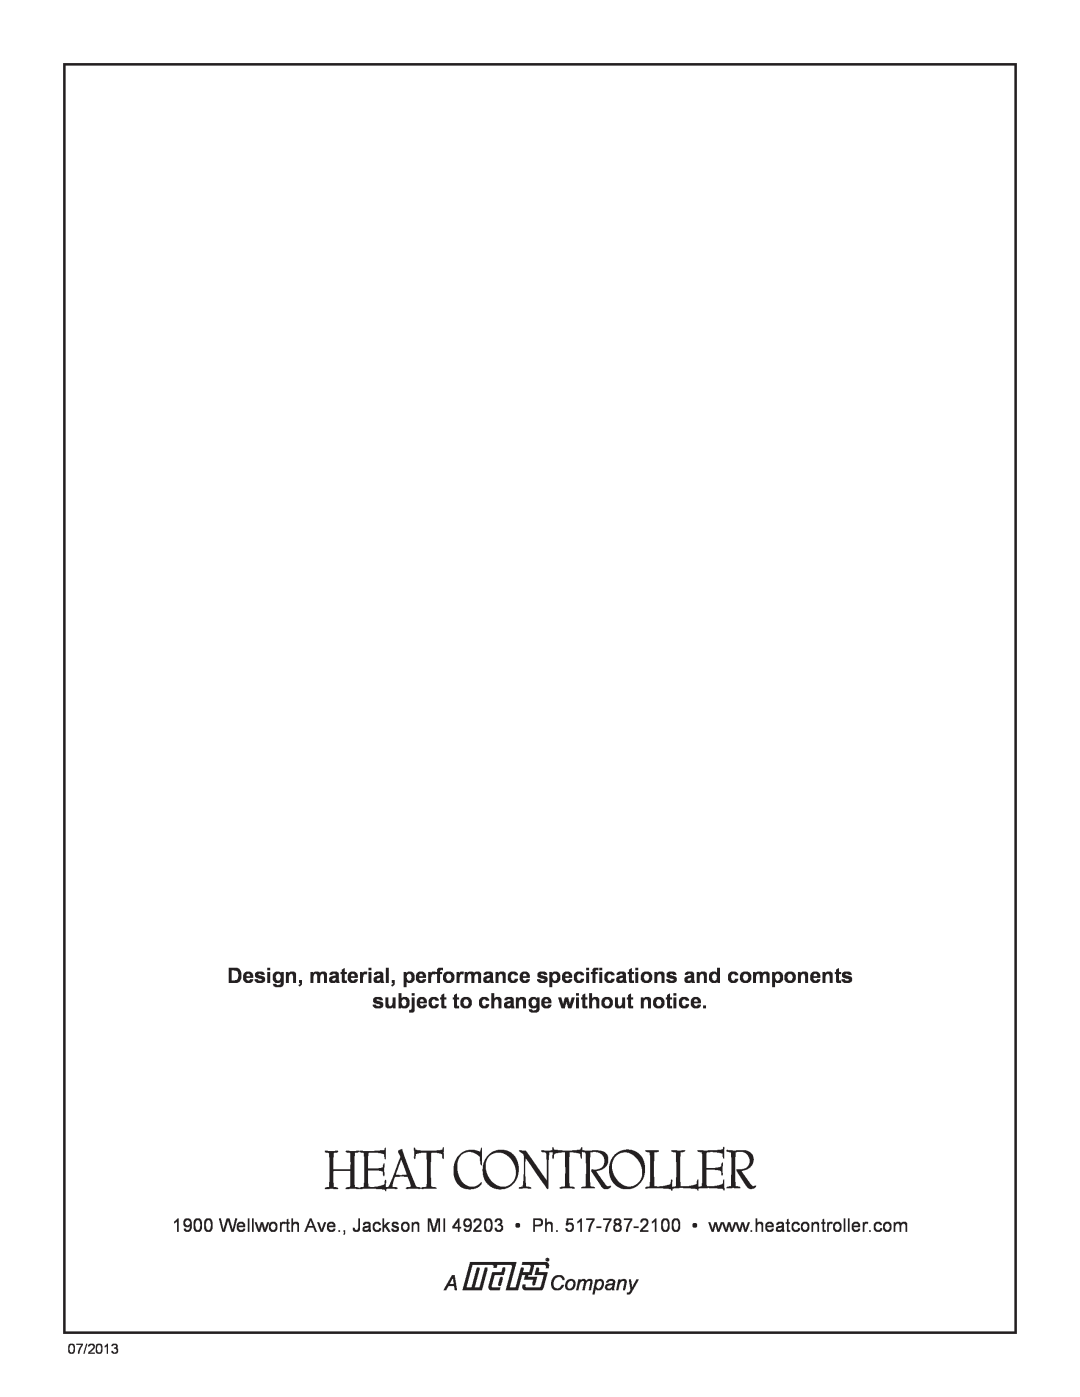 Heat Controller IR15S operation manual subject to change without notice, 07/2013 